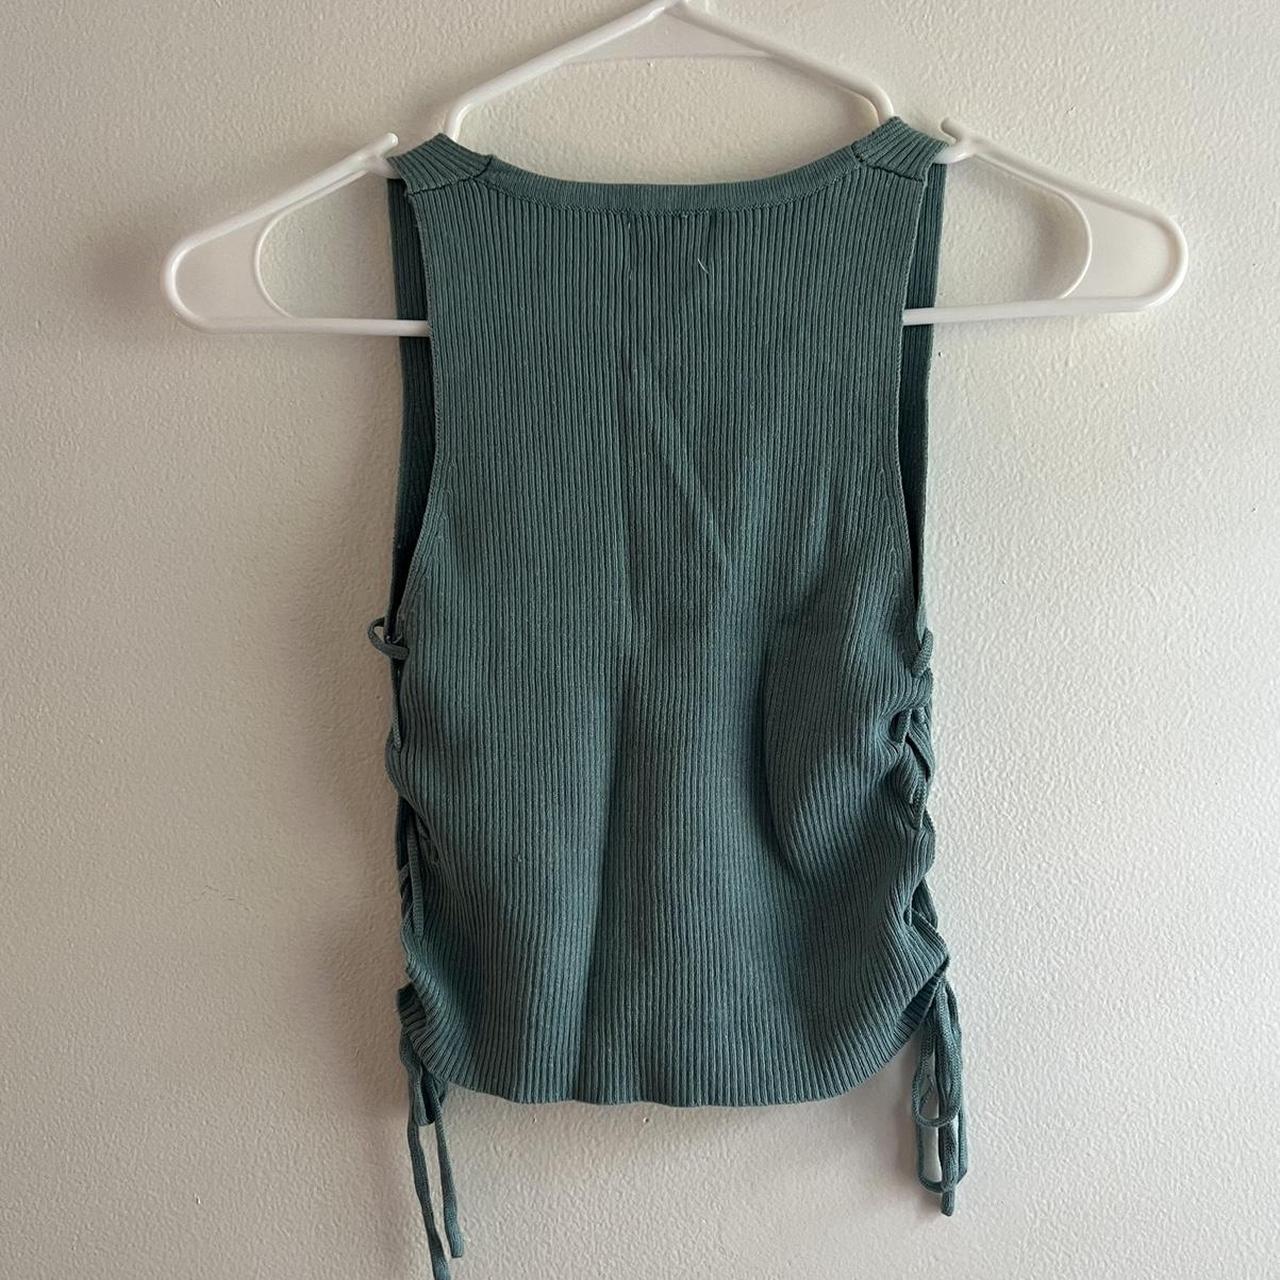 DREAMERS BY DEBUT Women's Blue and Green Vest (3)